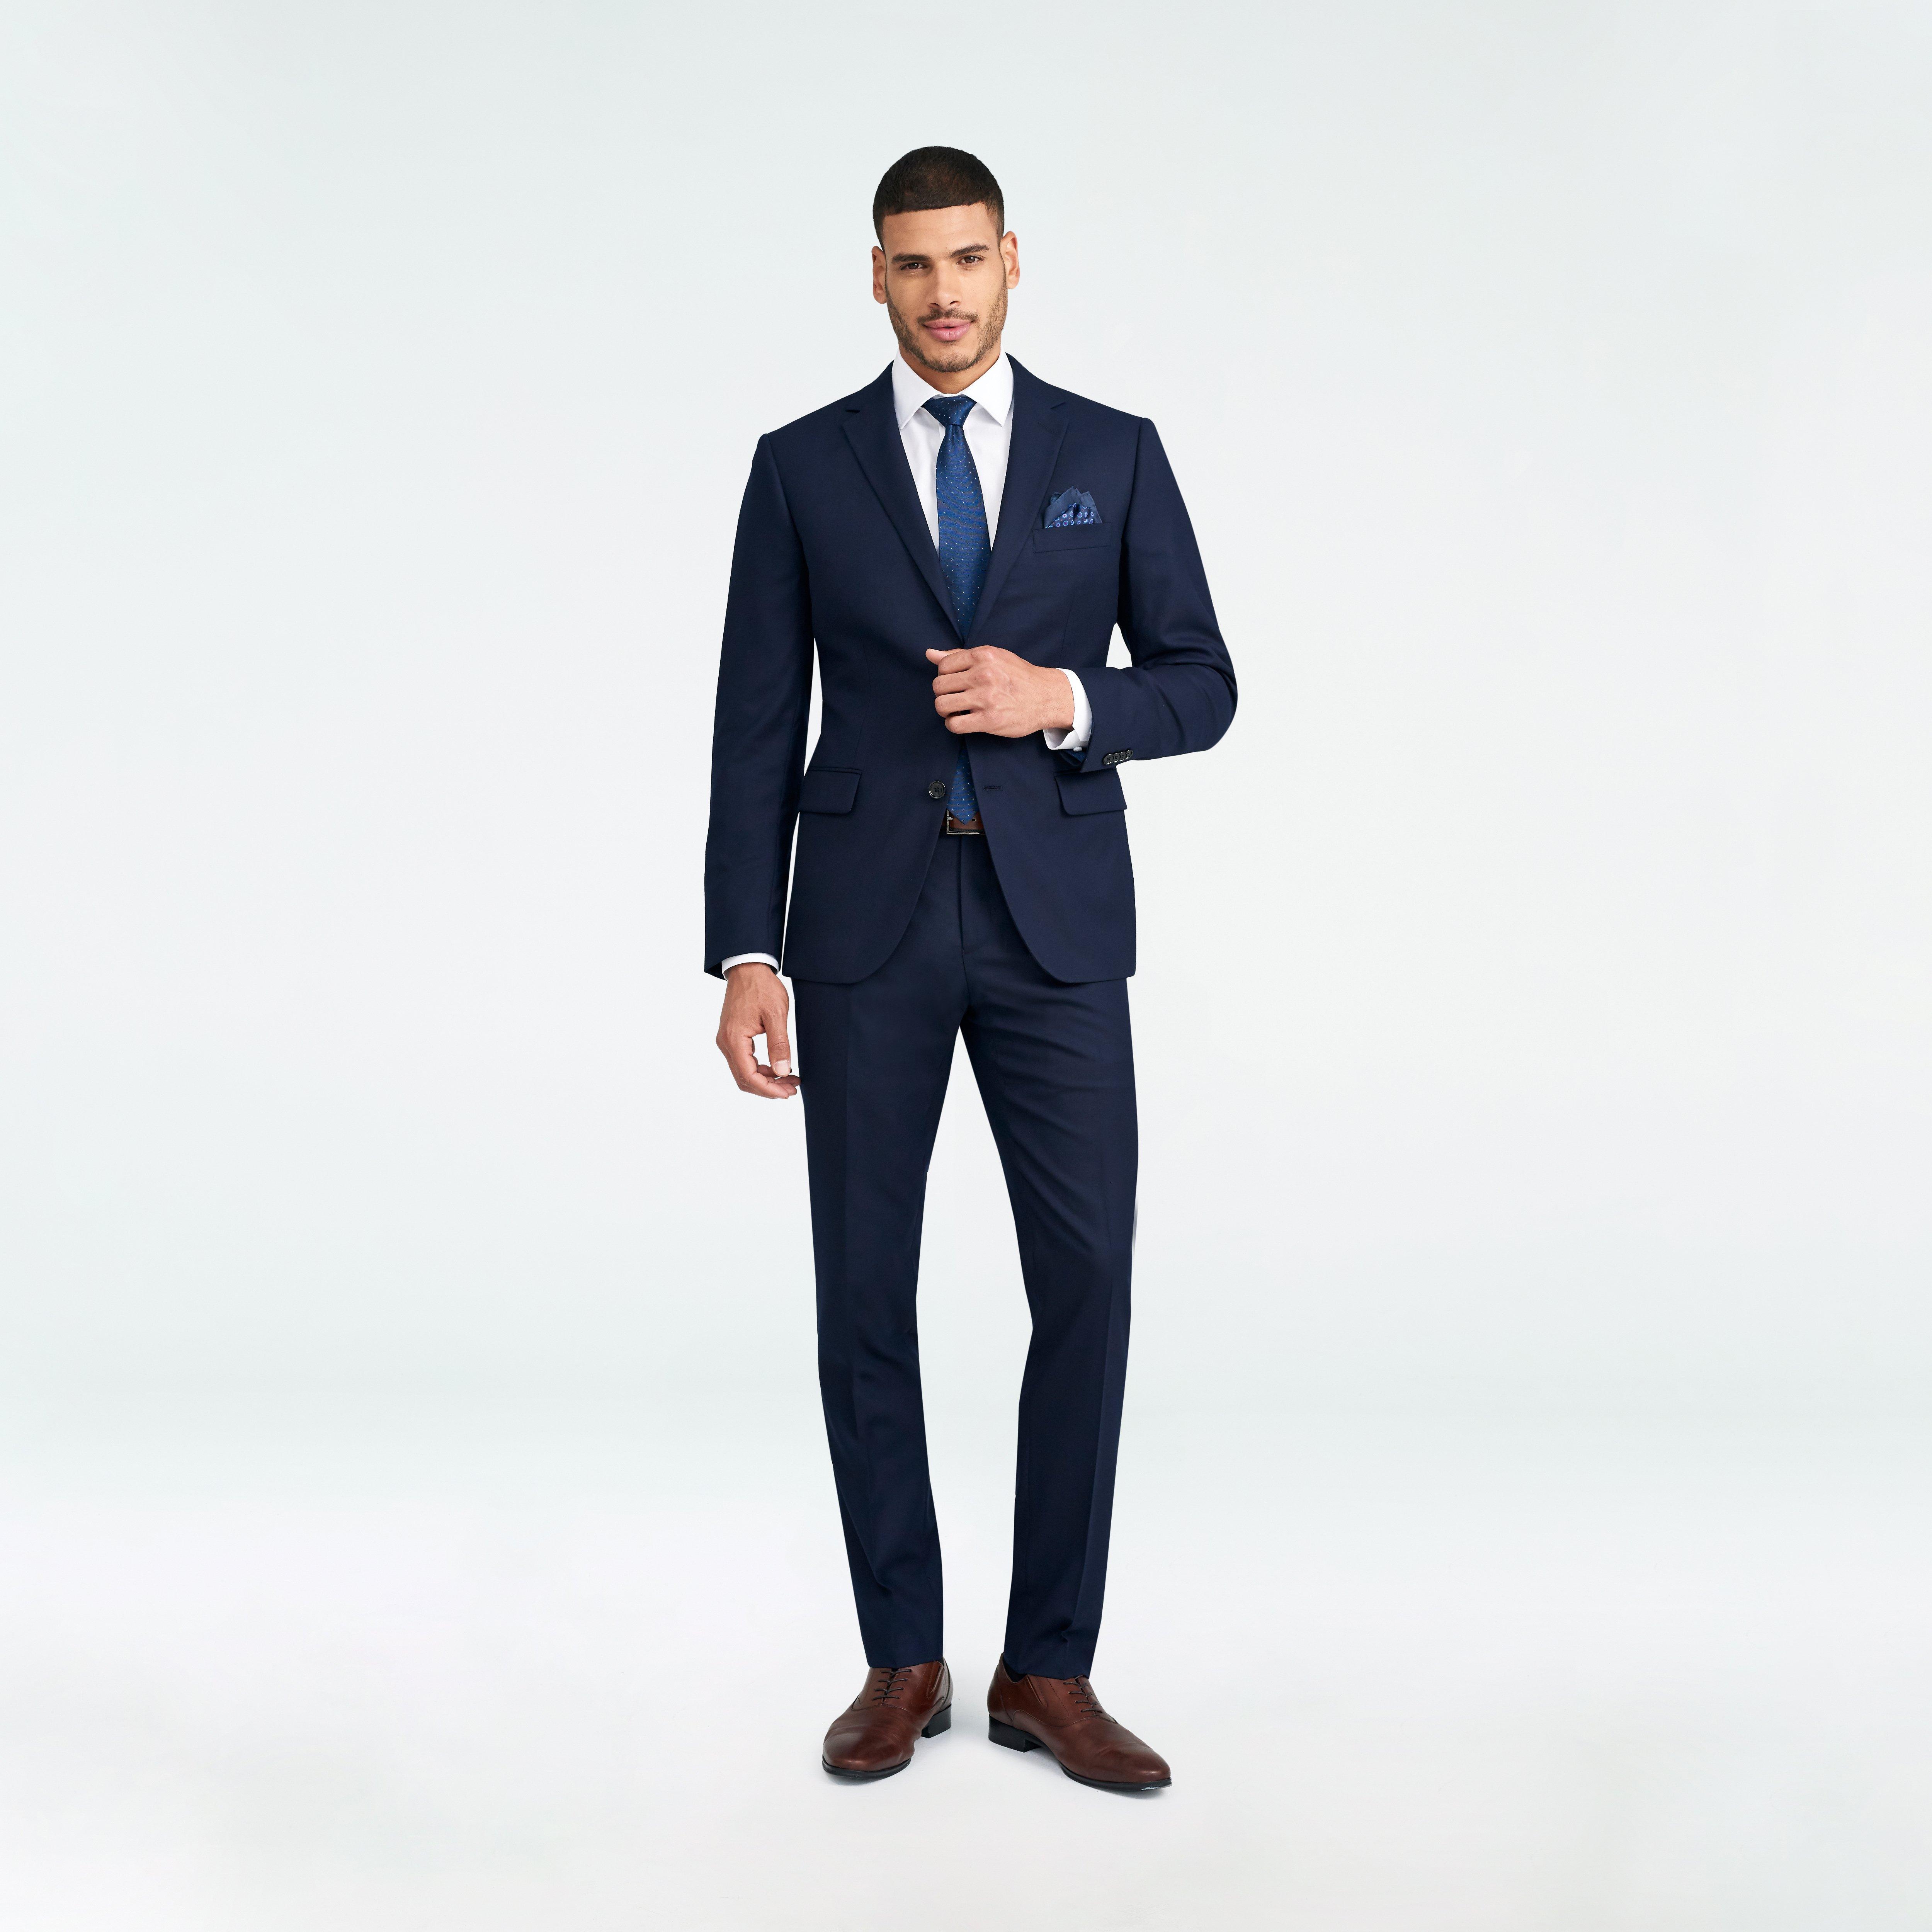 Custom Suits Made For You - Hayward Flannel Navy Suit | INDOCHINO